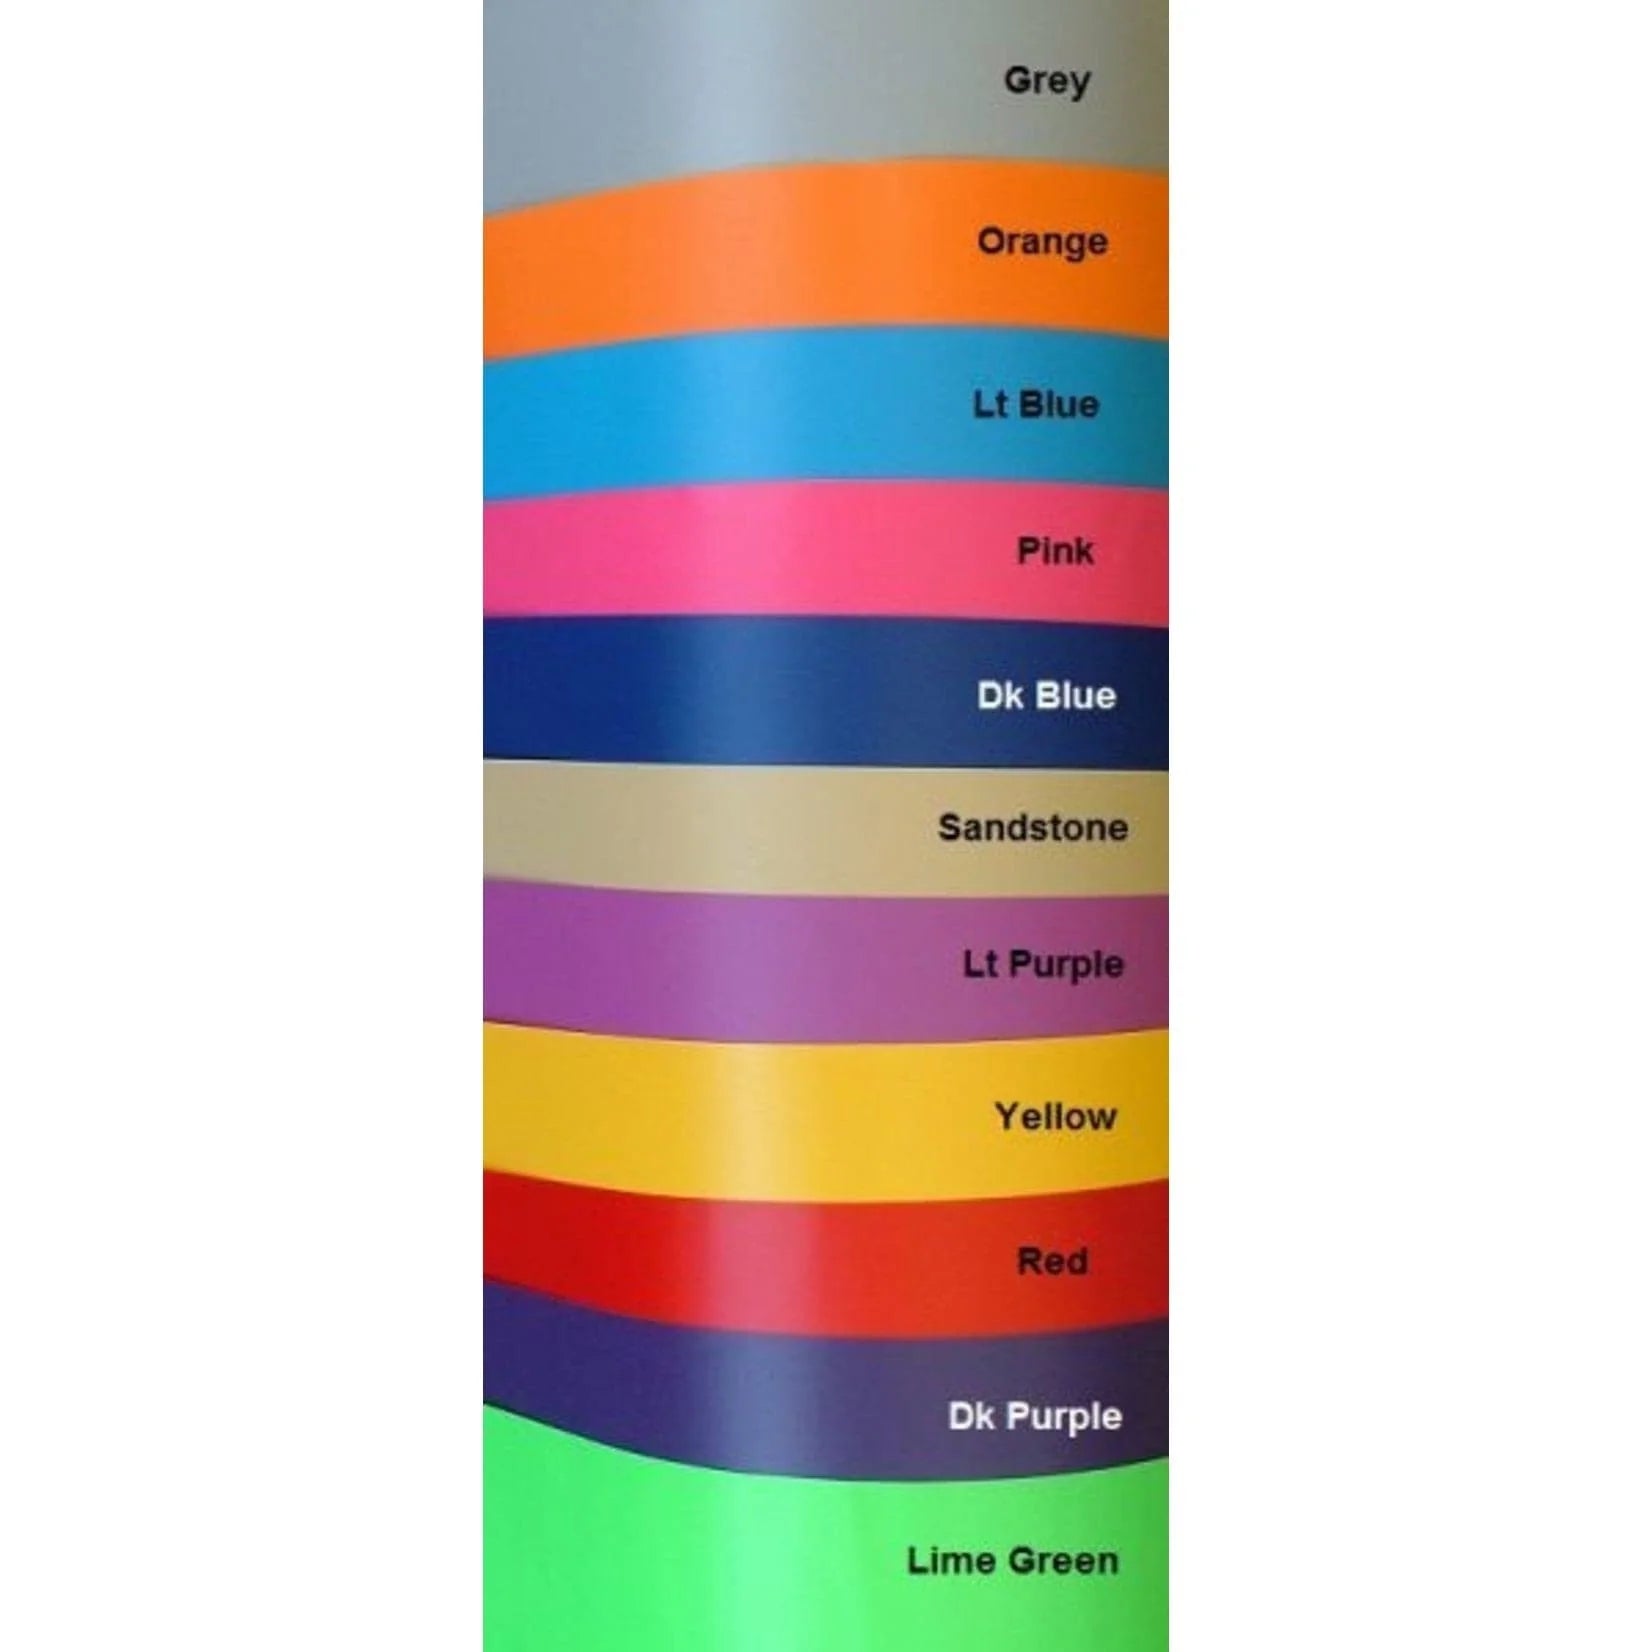 A waterproof PVC color chart featuring a variety of self-inflating air valves and Silverback Paco Pads by Jacks Plastic in different colors.